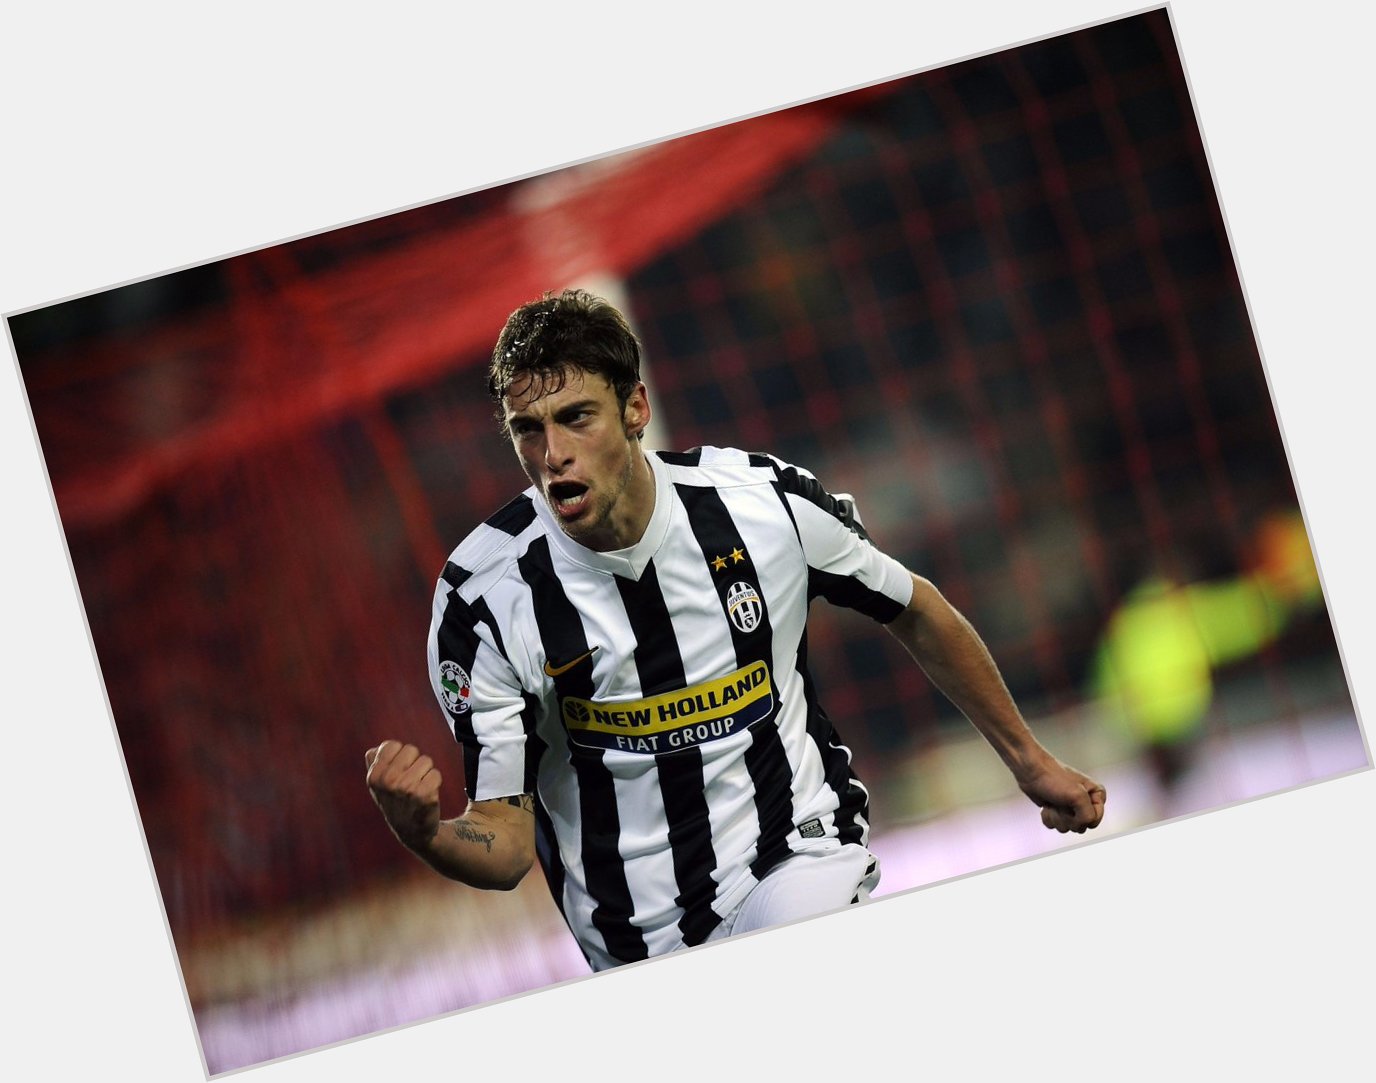 From the youth team to Juventus hero...

Wish Claudio Marchisio a happy birthday!    